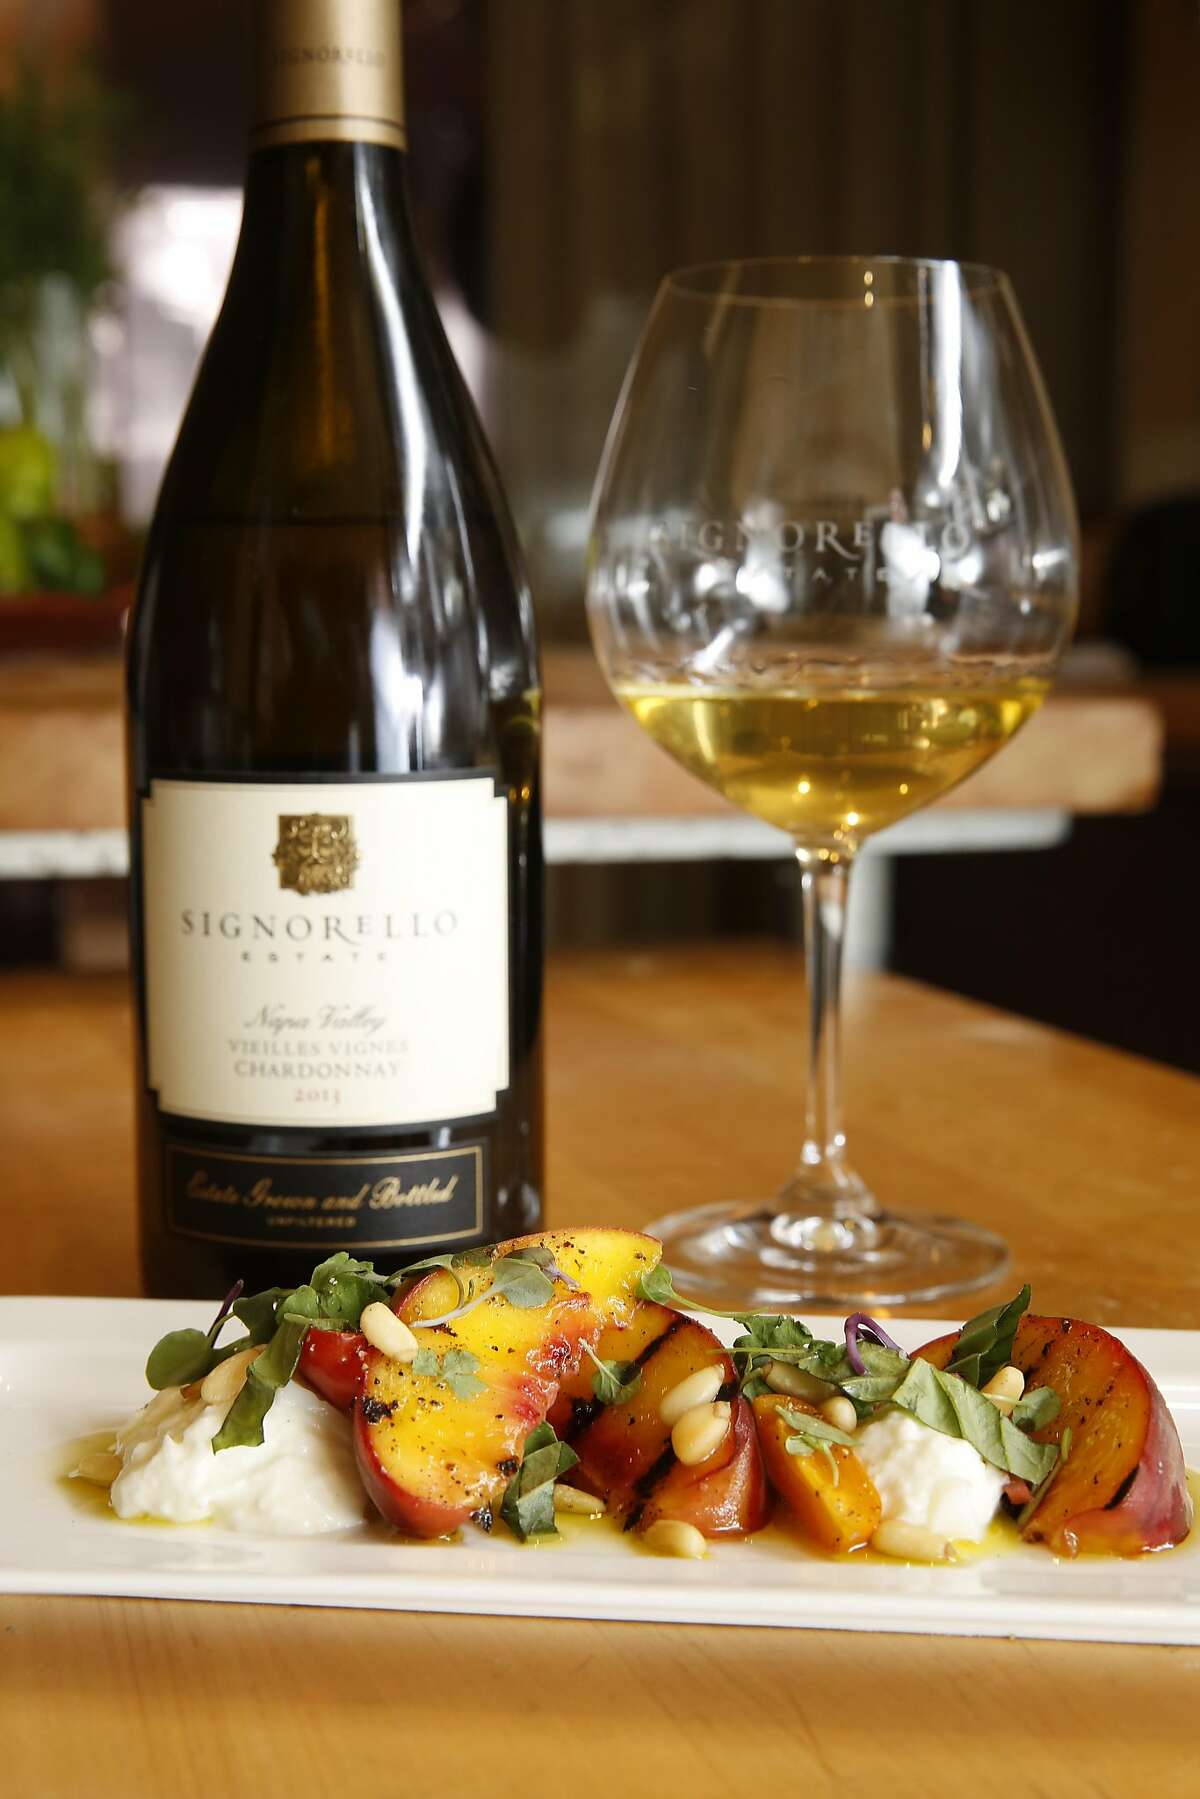 Wine pairing tasting premium experience at $175 at Signorello Estate winery in Napa, California on Saturday July 30, 2016. Grilled farmers market peaches, burrata, pickled radishes, basil and pine nuts prepared by chef Michael Pryor. Paired with 2013 Vieilles Vines Chardonnay, Estate.